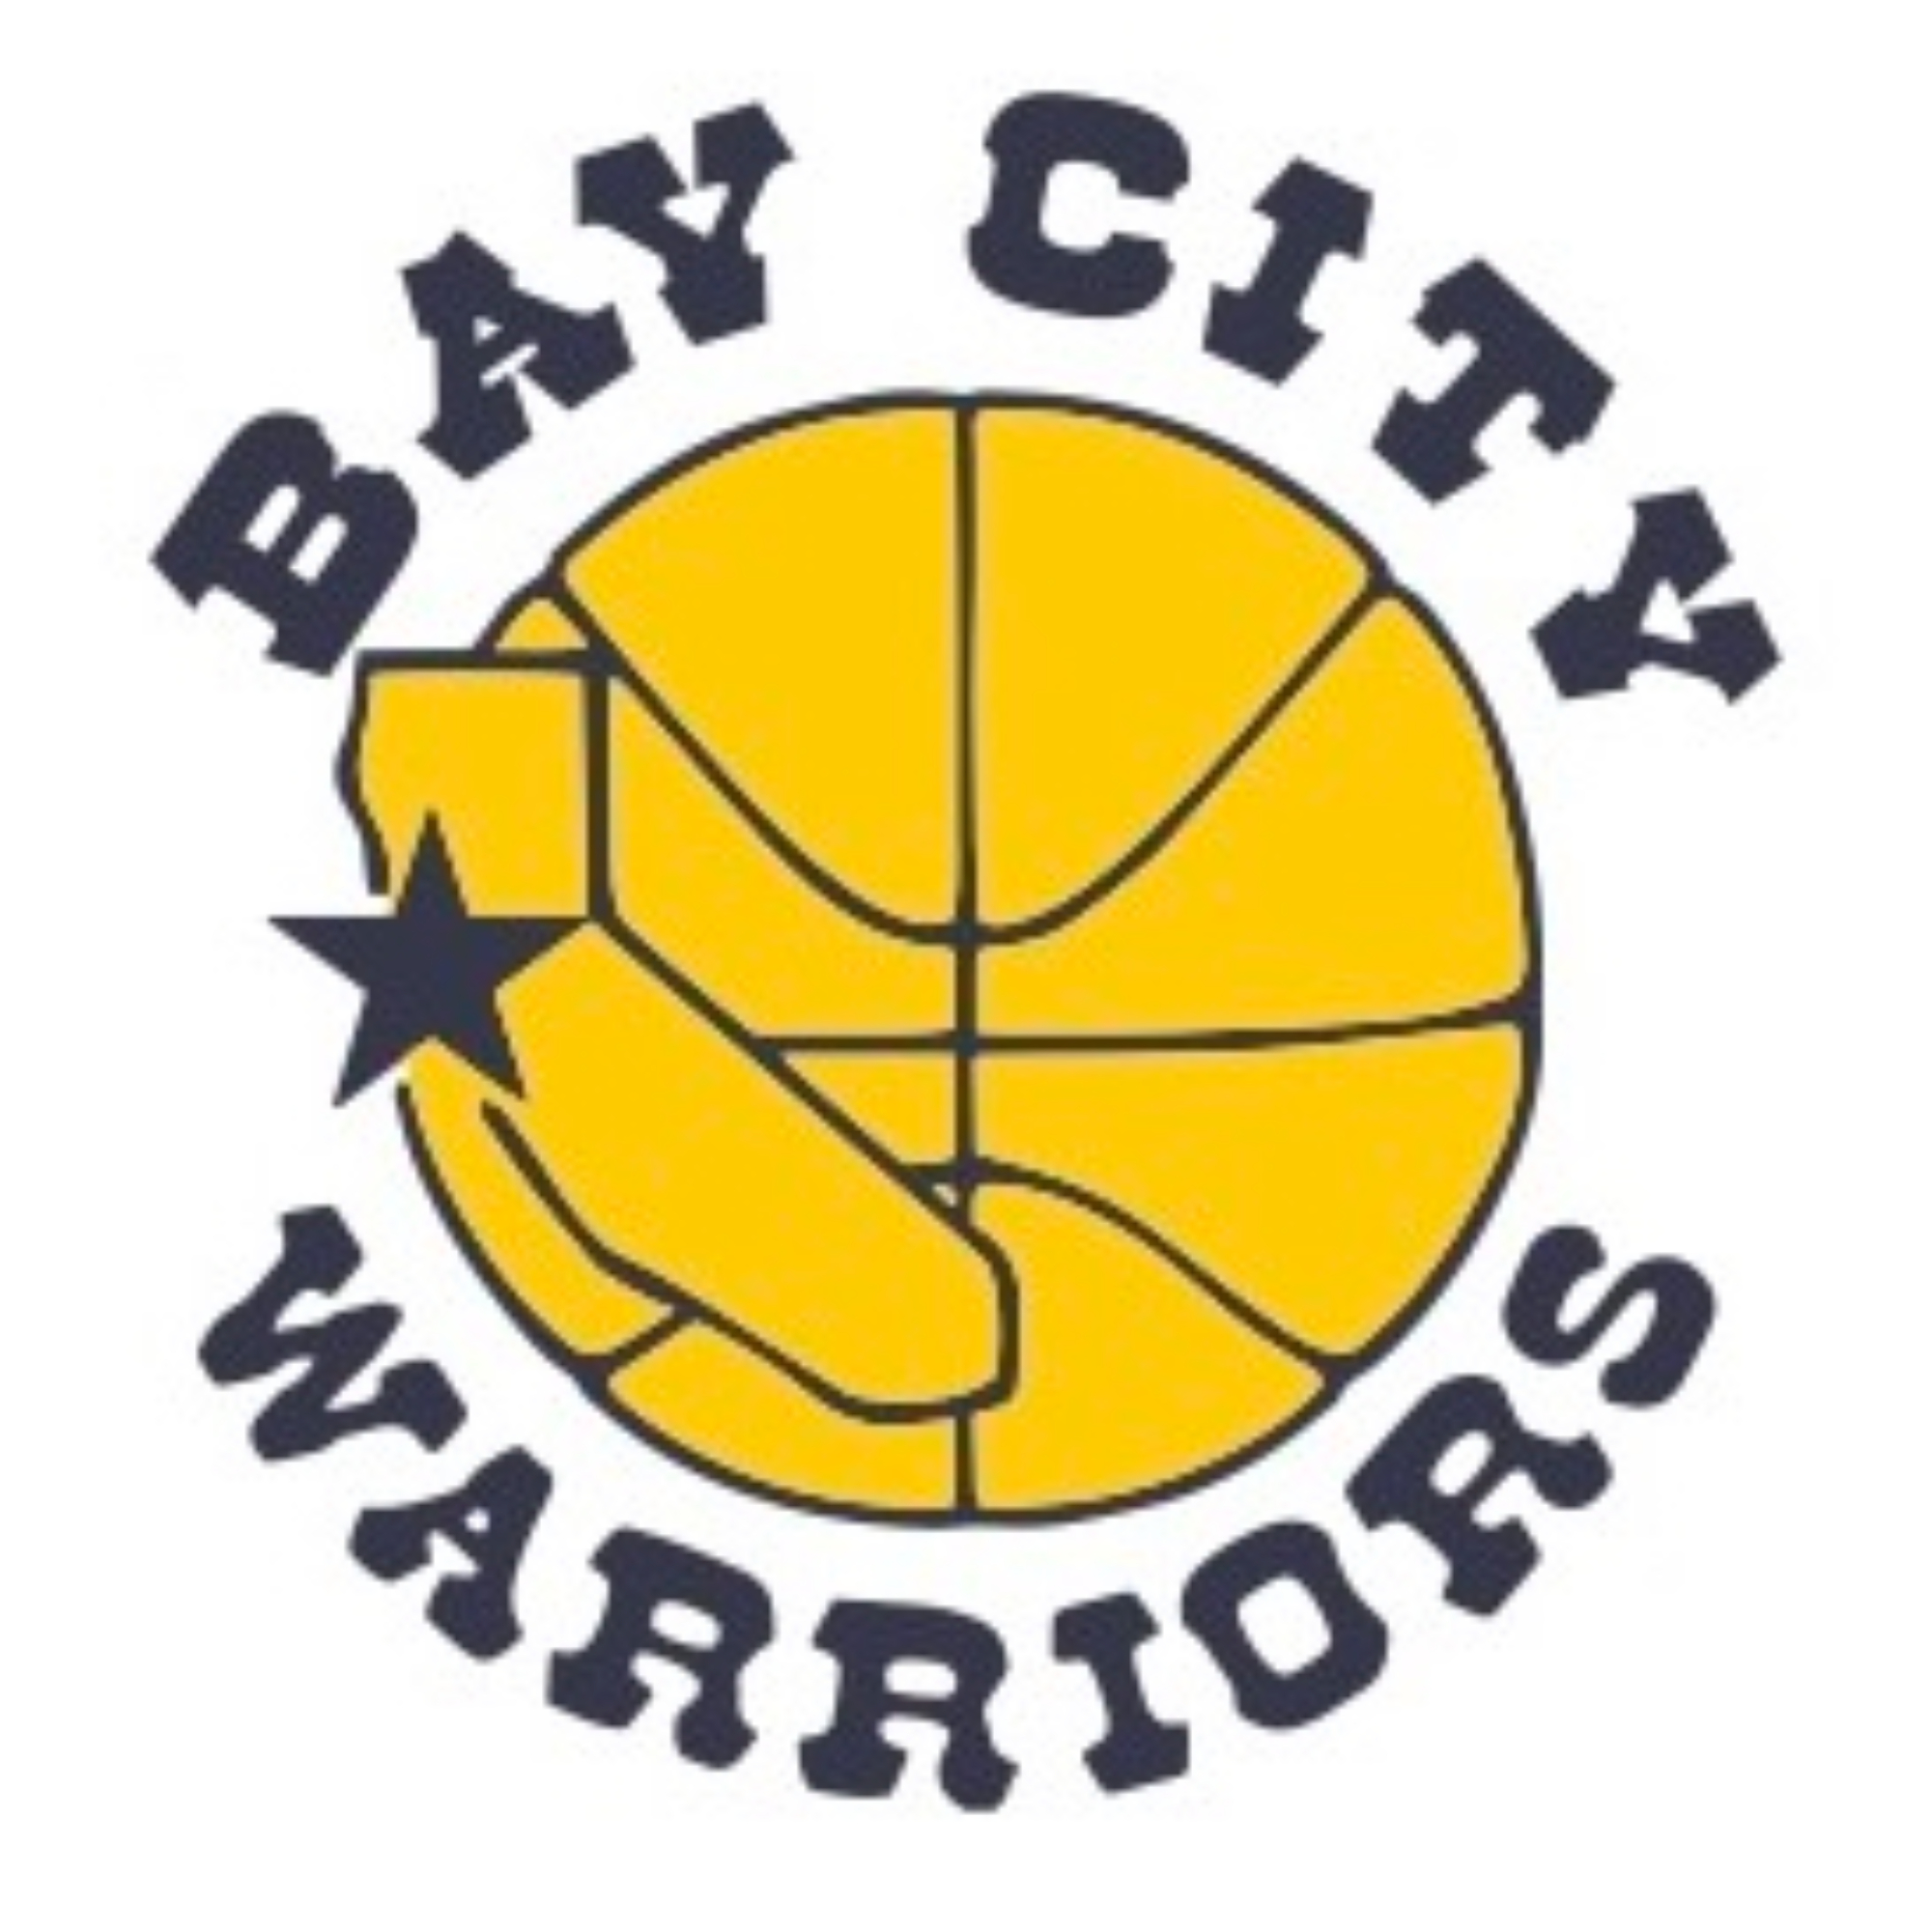 The official logo of Bay City Warriors